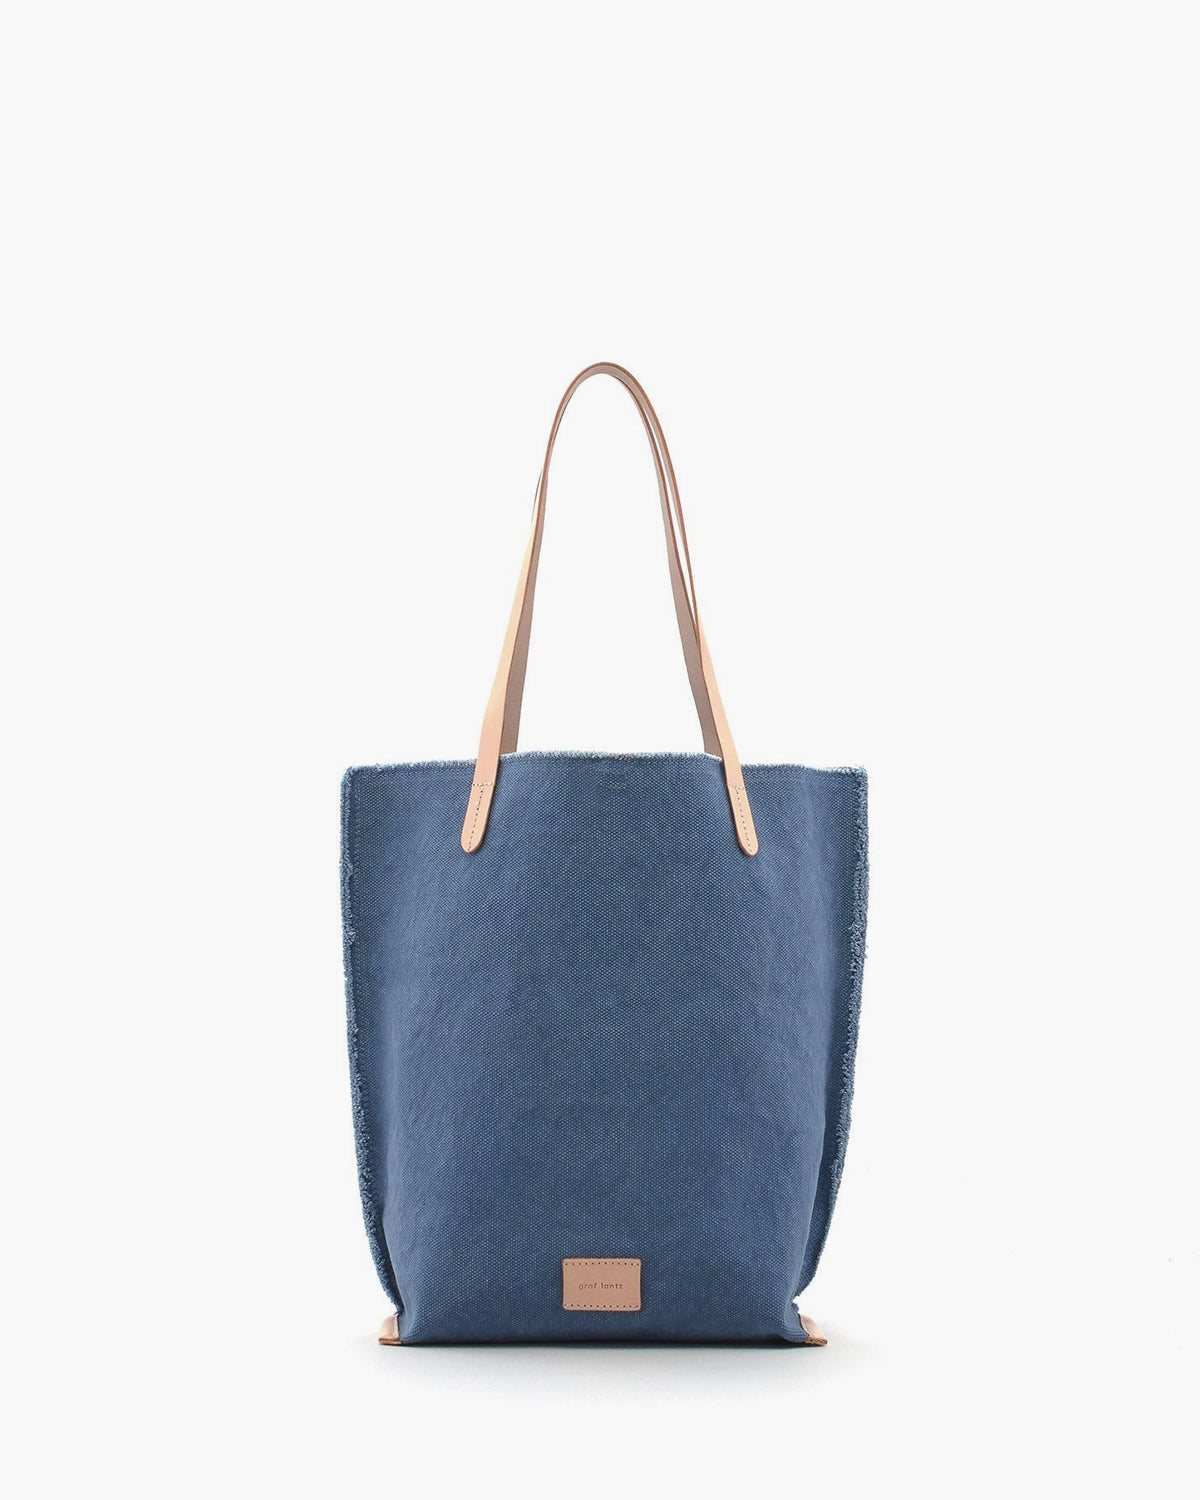 Hana 100% Hand Dyed Cotton Canvas Tote Bag in Natural